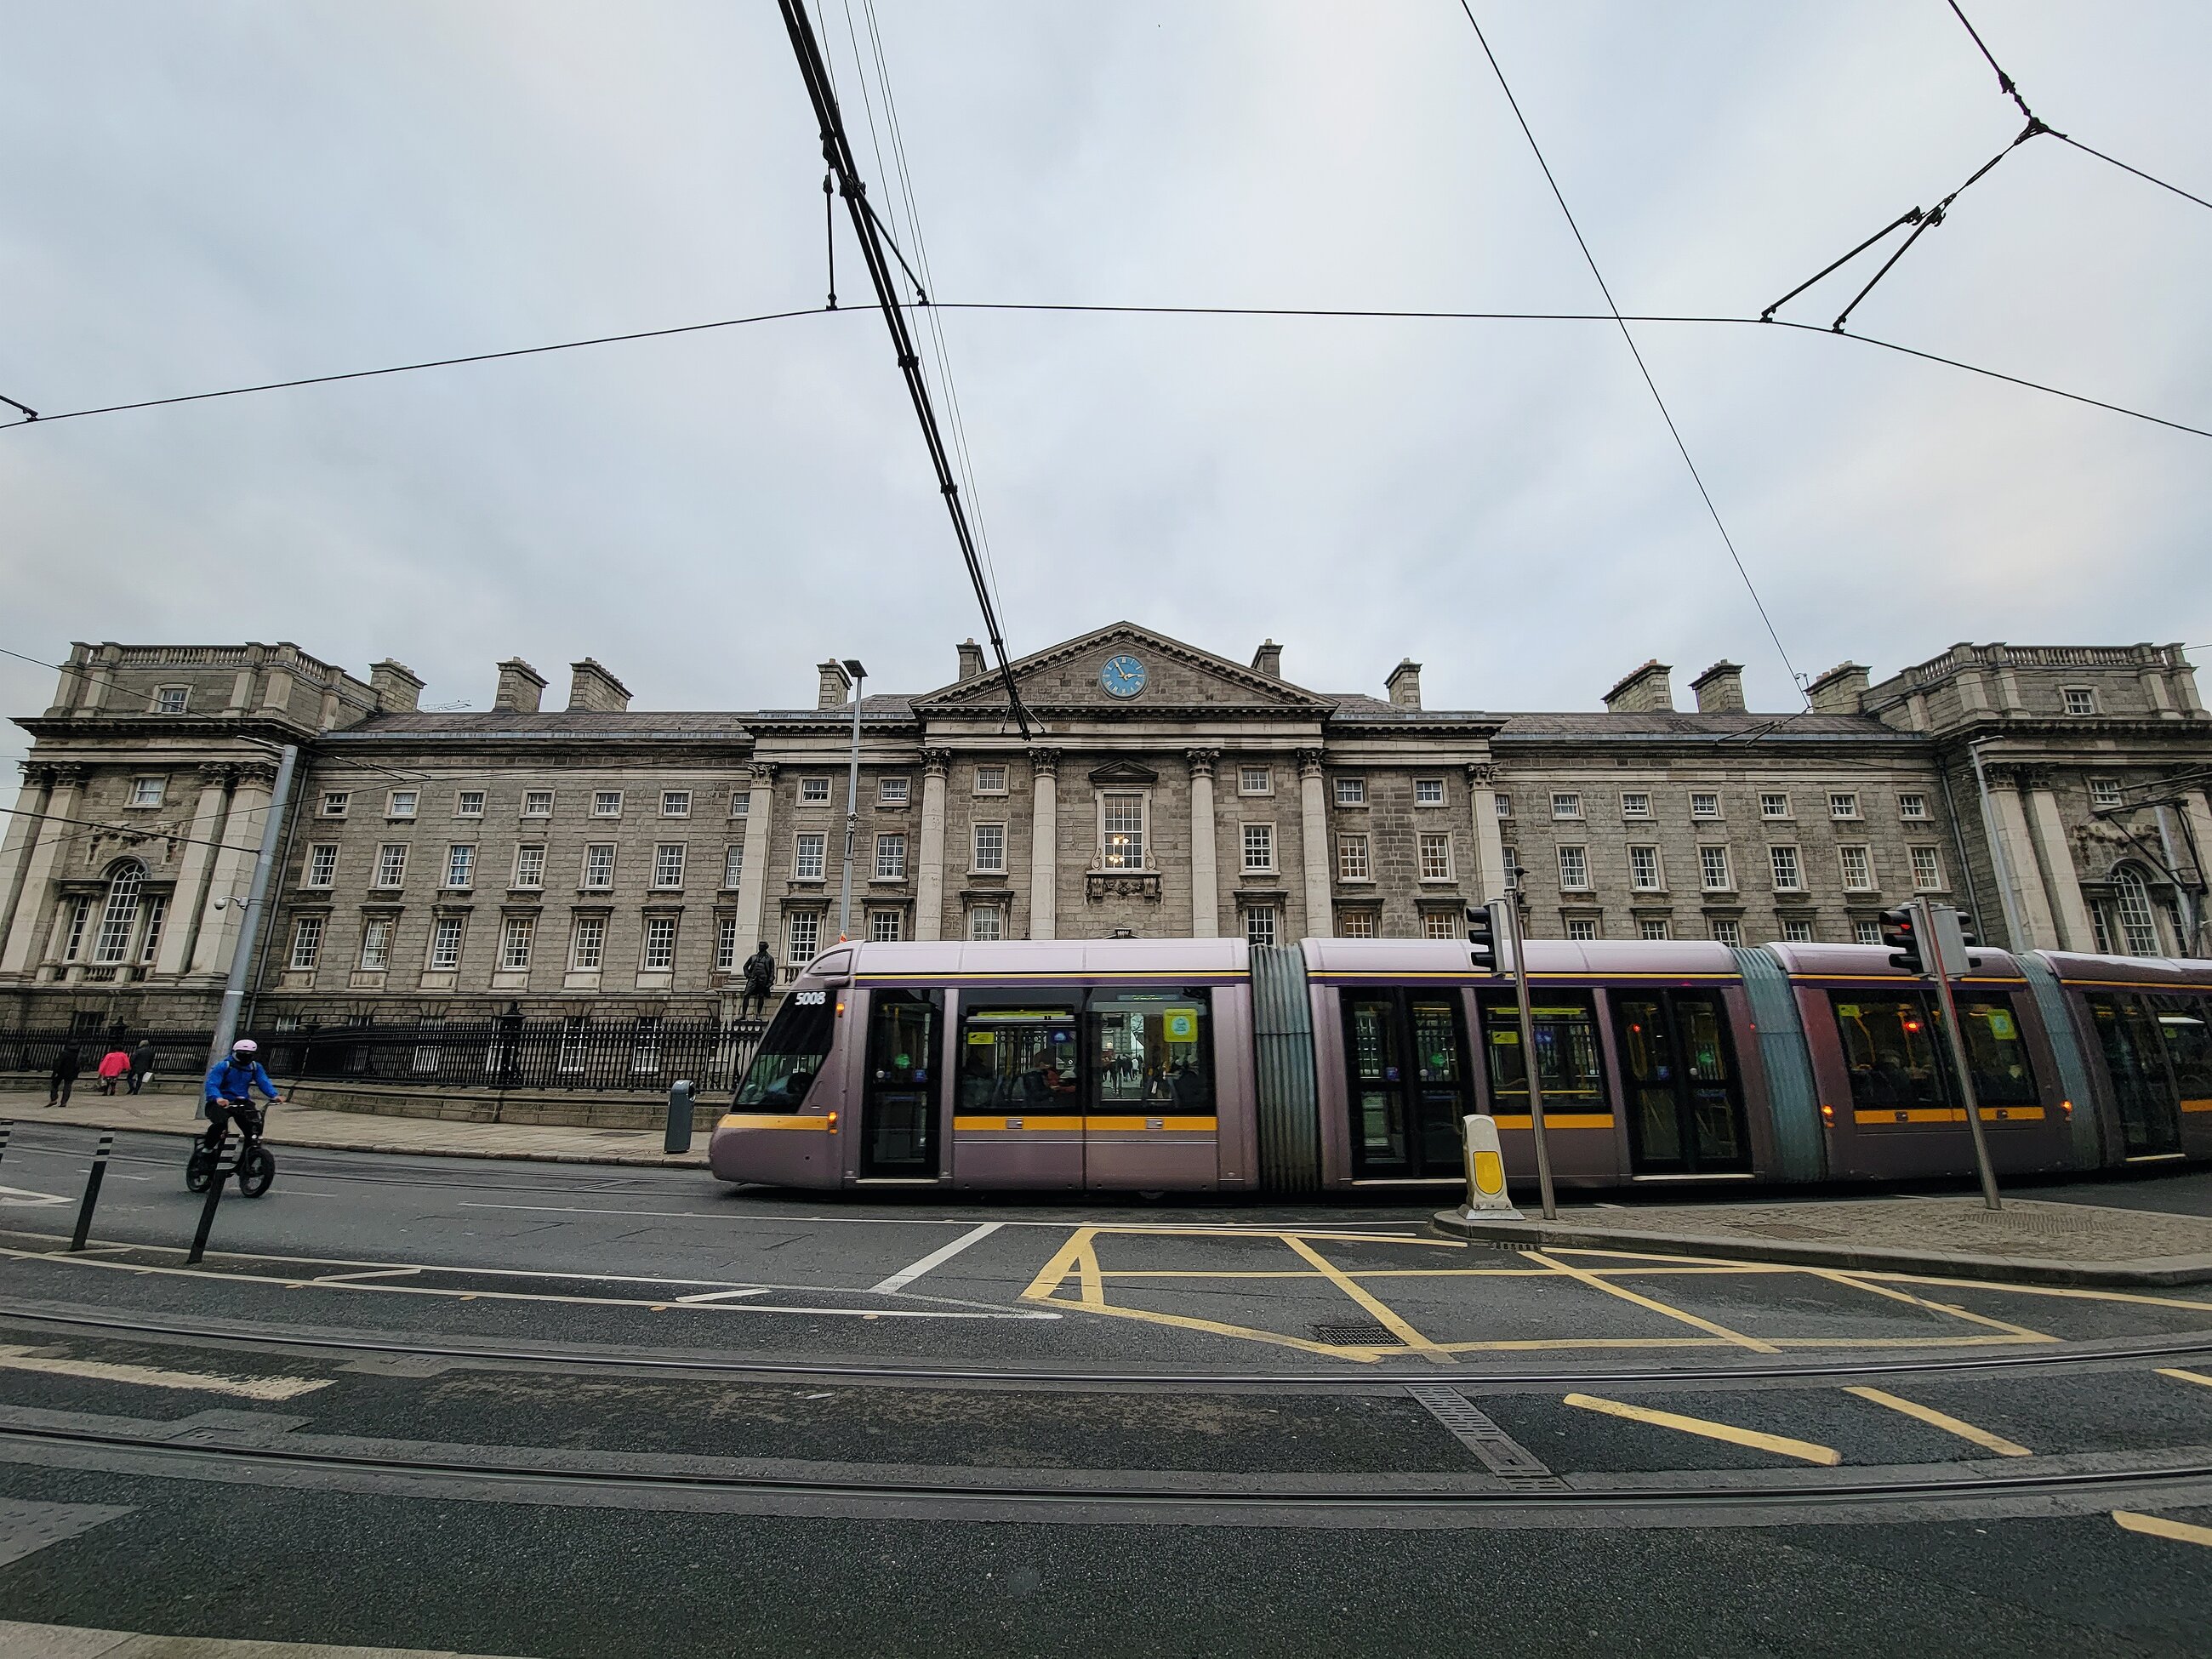 Trinity front gates with Luas tram